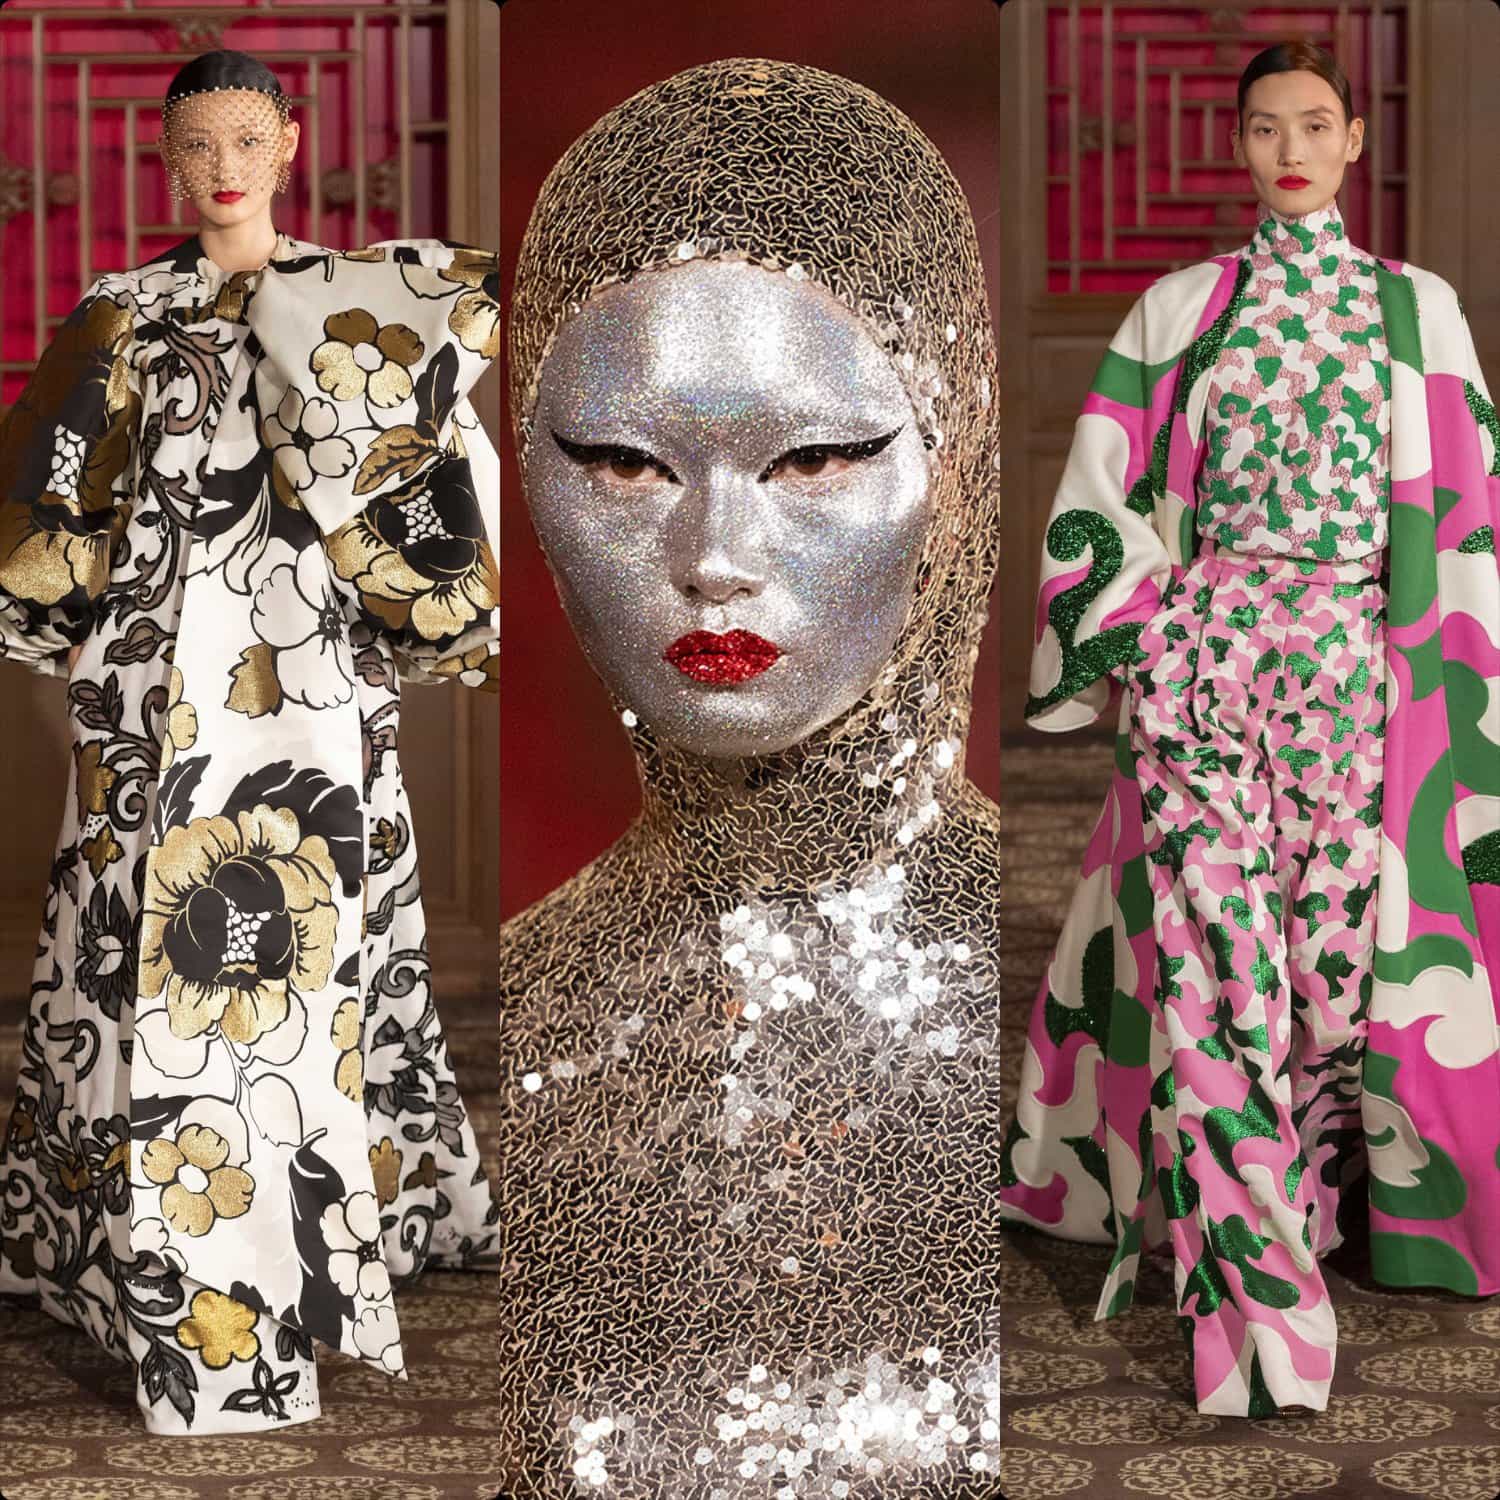 Valentino Haute Couture Beijing fashion show "DayDream", November 7, 2019 At the summer palace in Beijing, collection by Pierpaolo Piccioli. RUNWAY MAGAZINE ® Collections. RUNWAY NOW / RUNWAY NEW